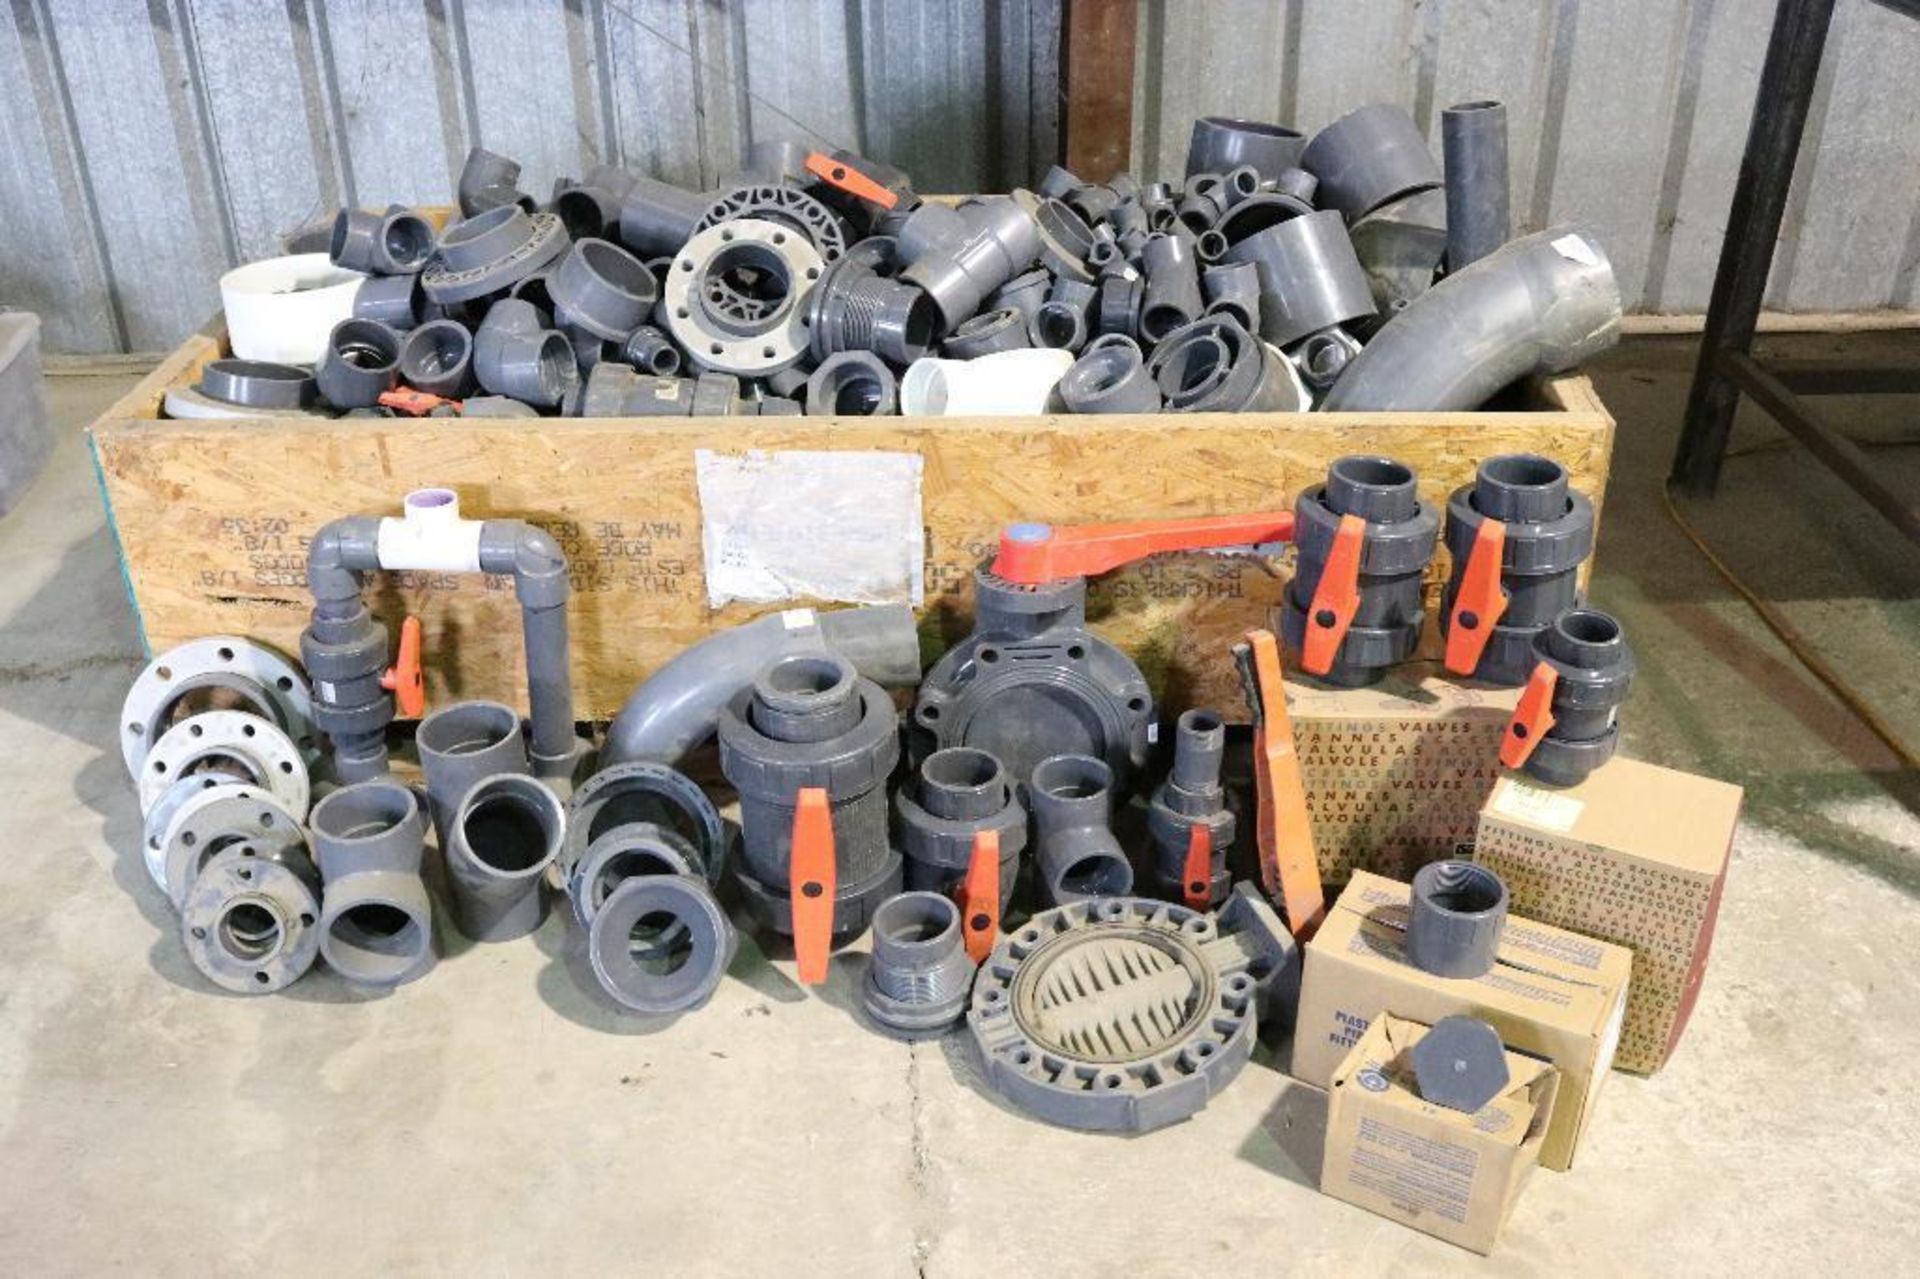 Large Assortment of PVC Valves, Fittings, Flanges, Connections, and More! Various Sizes. See Photo f